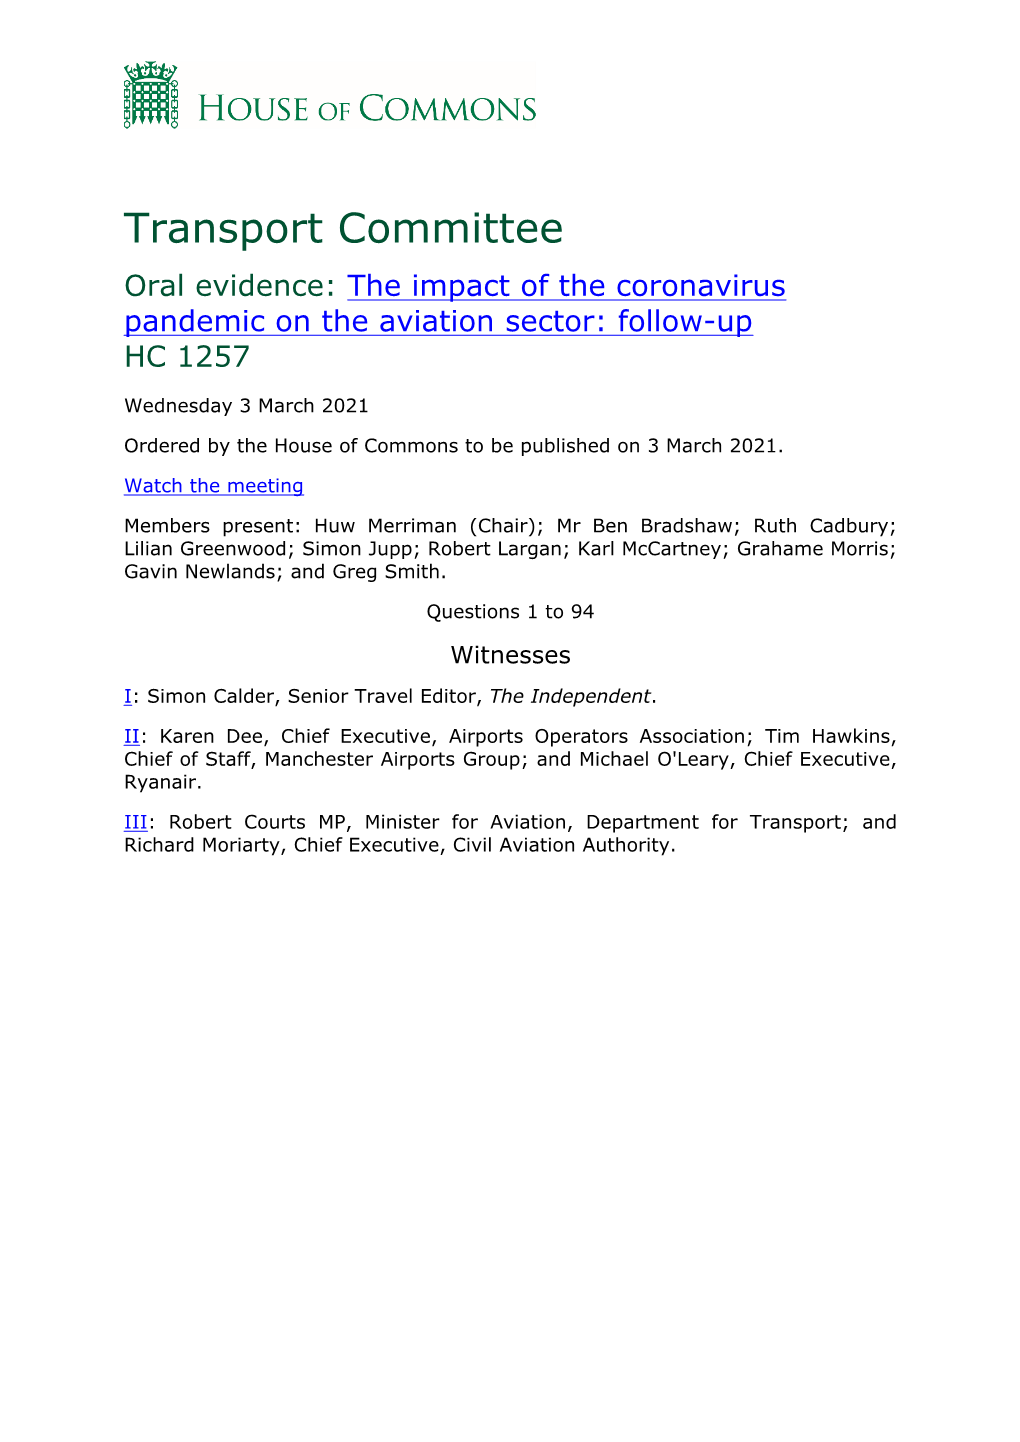 Transport Committee Oral Evidence: the Impact of the Coronavirus Pandemic on the Aviation Sector: Follow-Up HC 1257